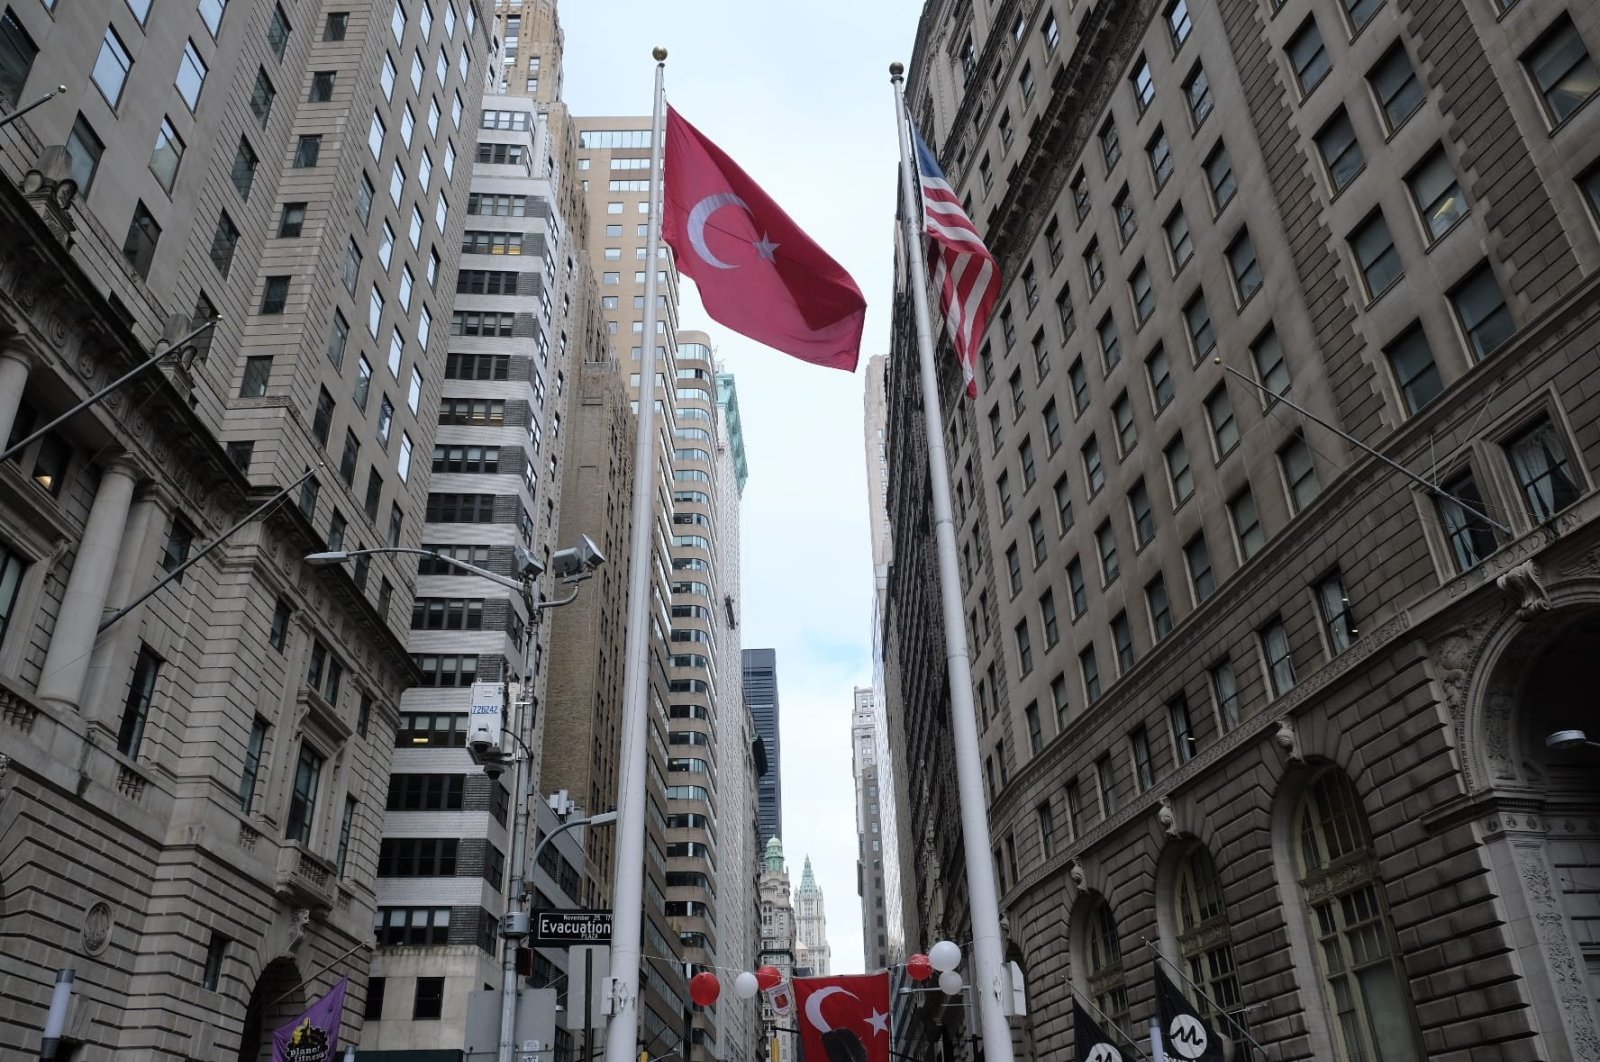 The Turkish and American flags fly in the Bowling Green Park area on Wall Street, New York, U.S., Oct. 31, 2021. (AA File Photo)